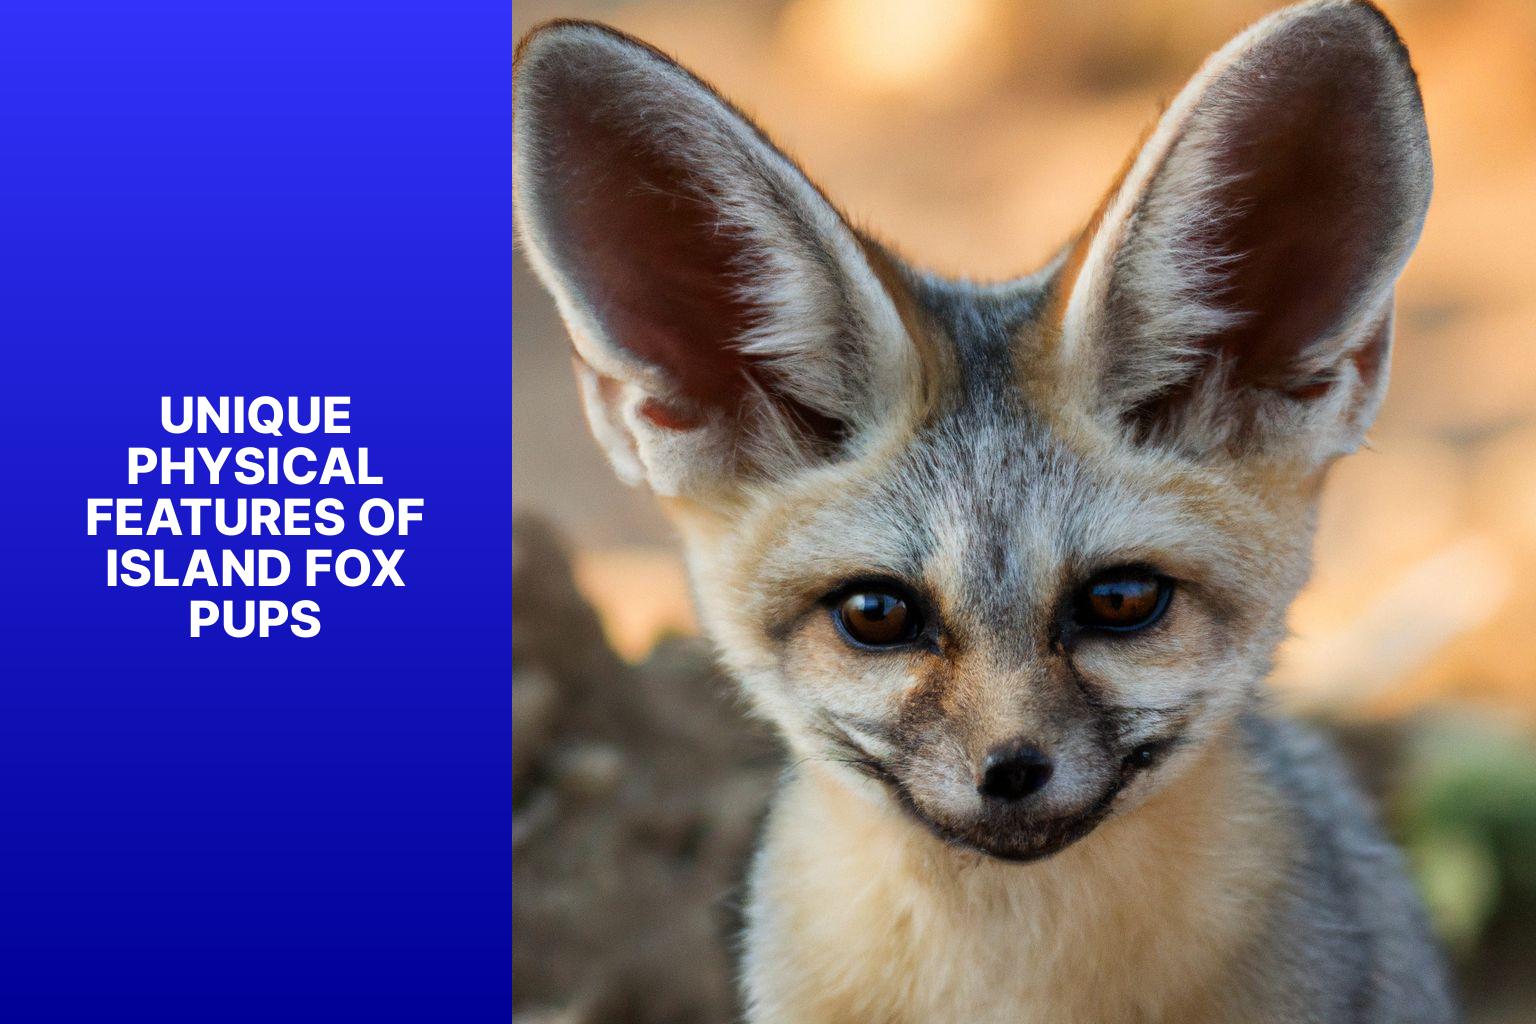 Unique Physical Features of Island Fox Pups - Island Fox Physical Features 